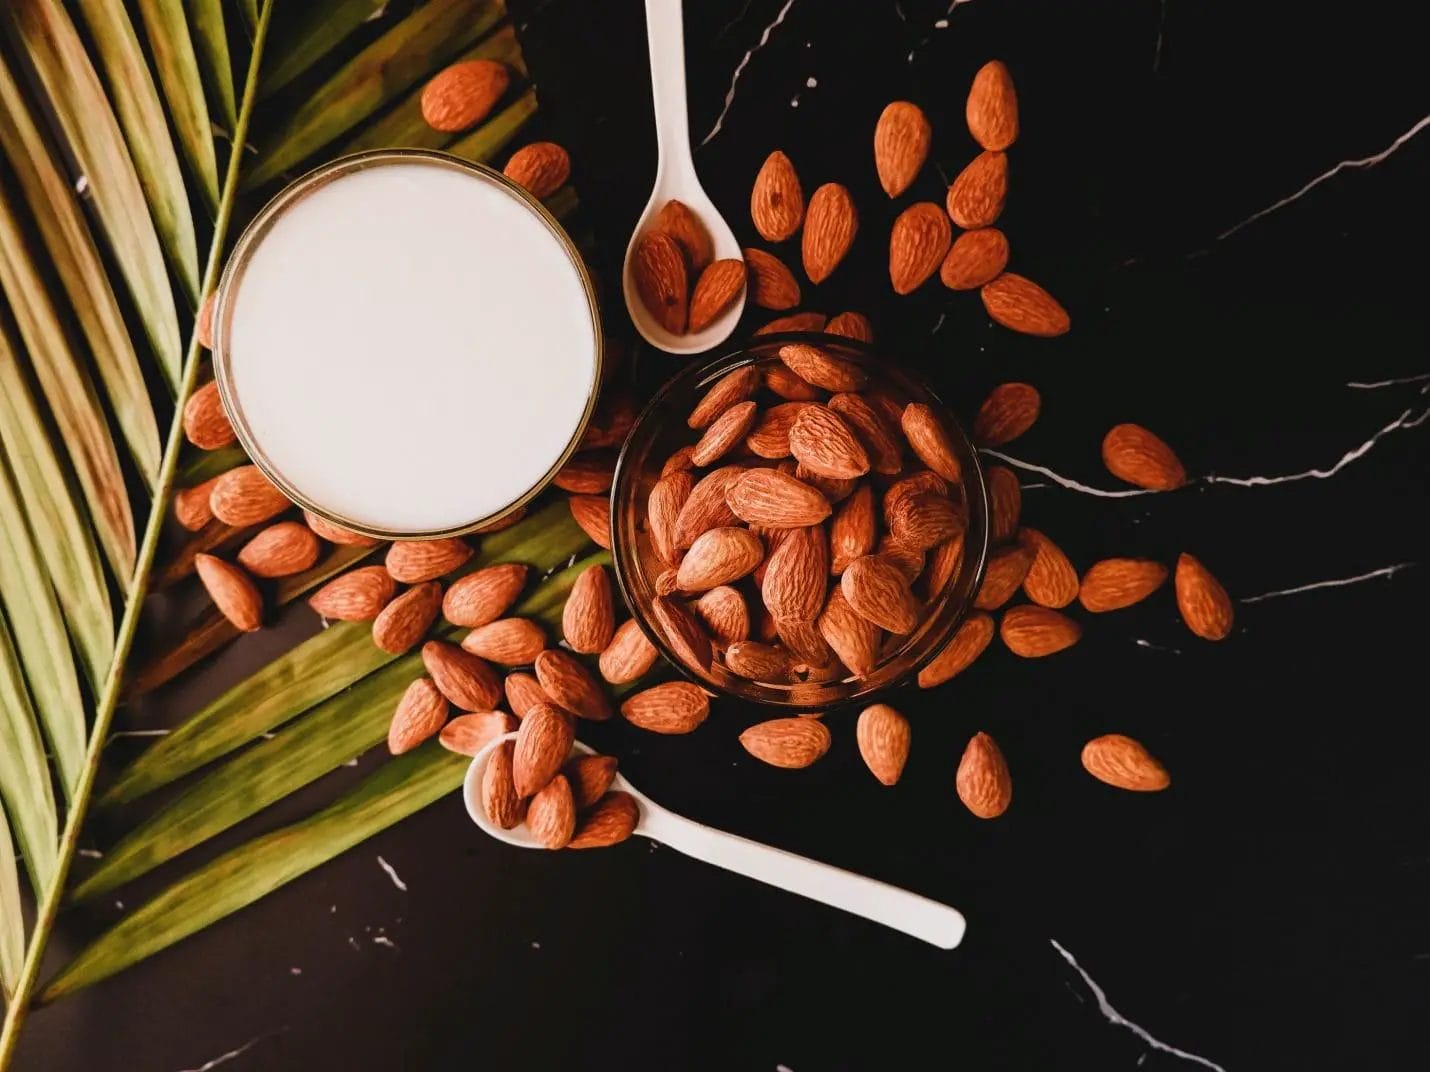 Can almond milk be consumed every day?